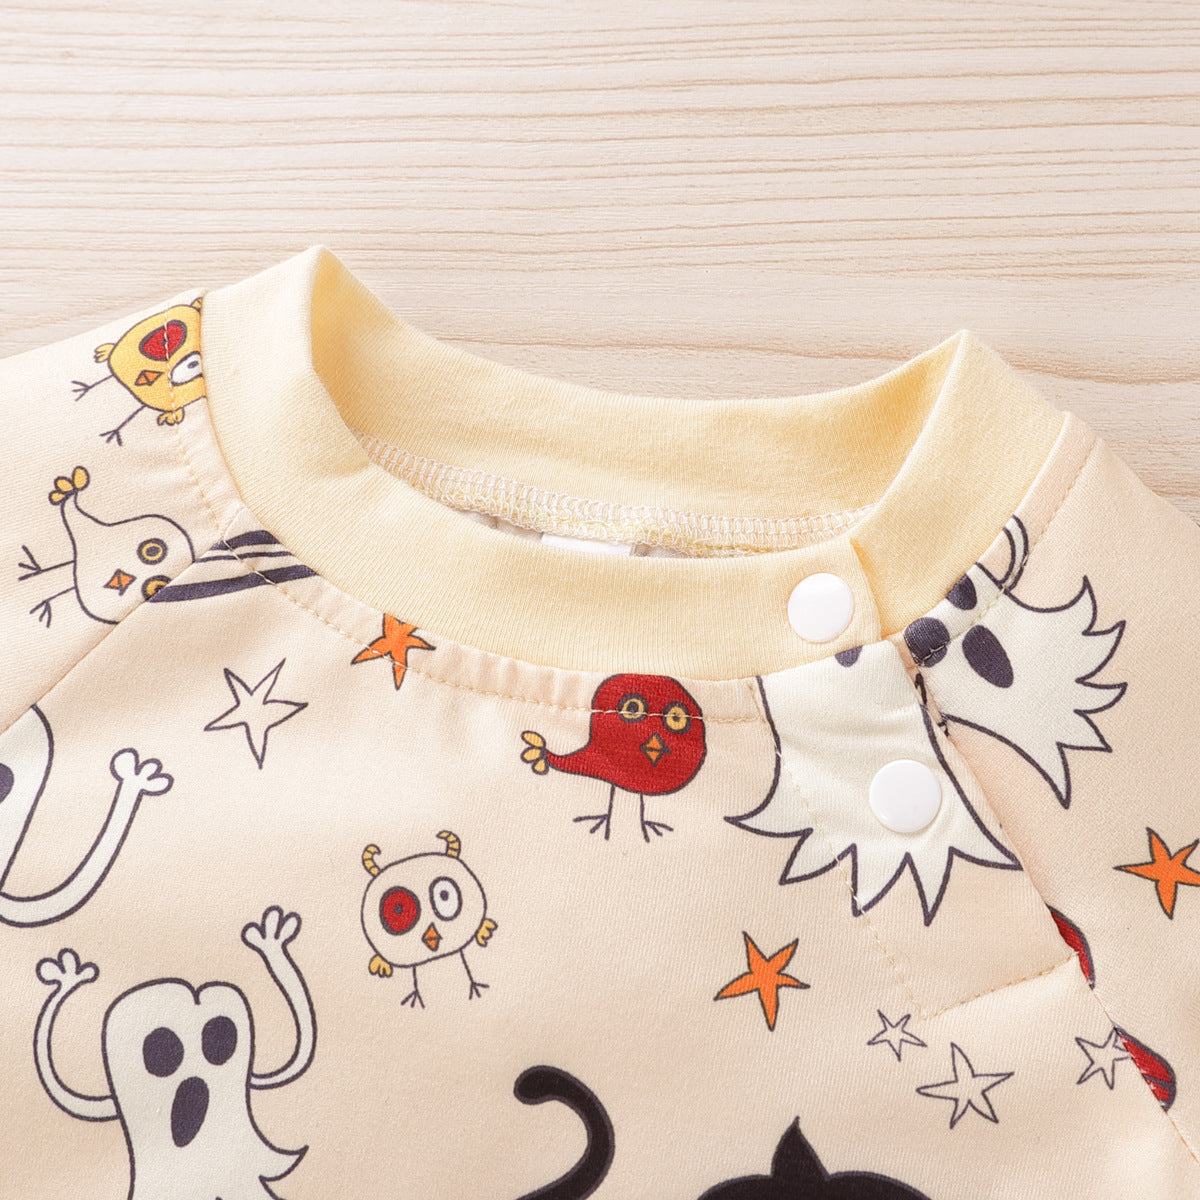 Spooky and Adorable: Dress Your Little One in Our Halloween Print Baby Jumpsuit